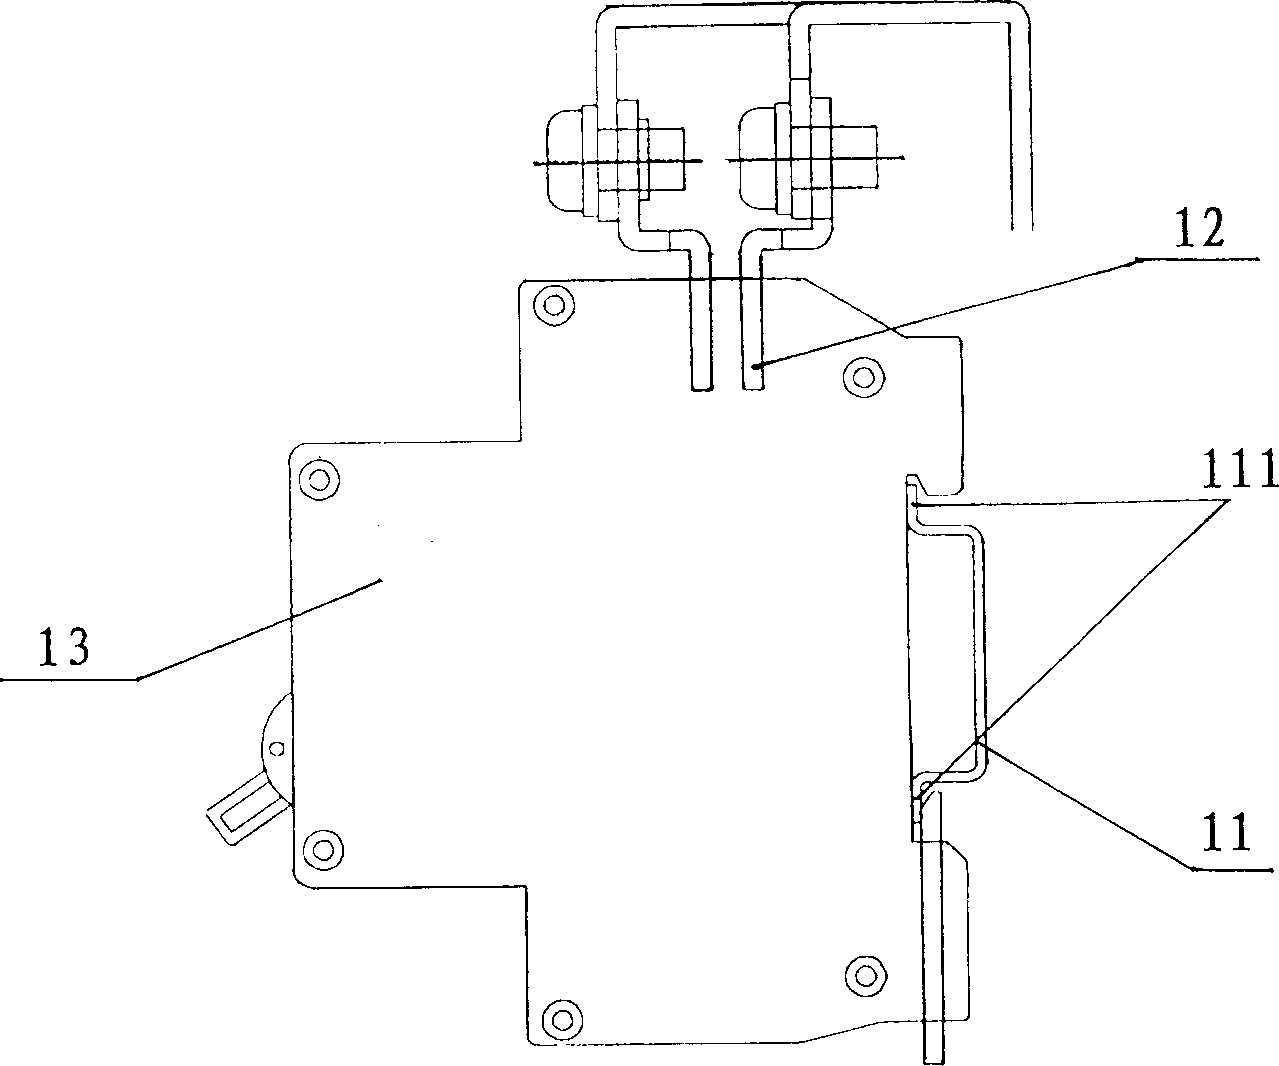 Guide way structure for installing switch of switchboard